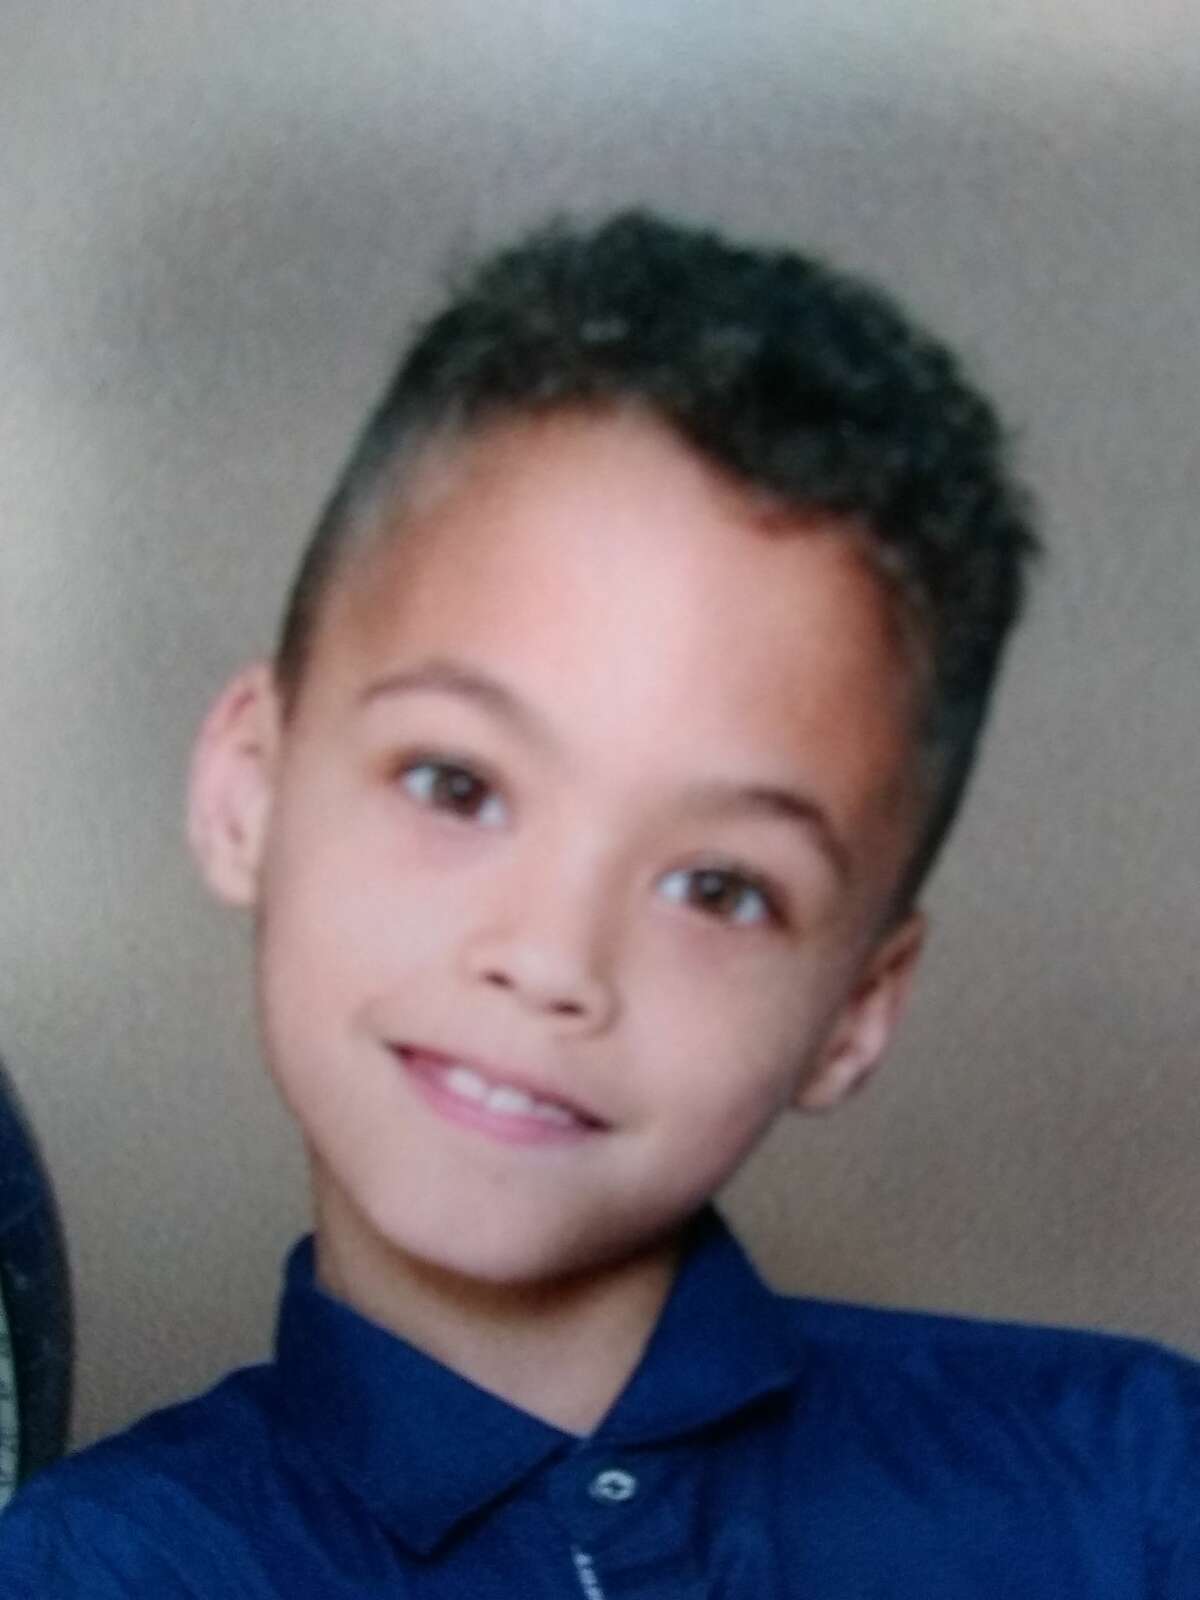 Isaiah “Ronnie” Hedland, 9, went missing Tuesday Feb. 19, 2019.